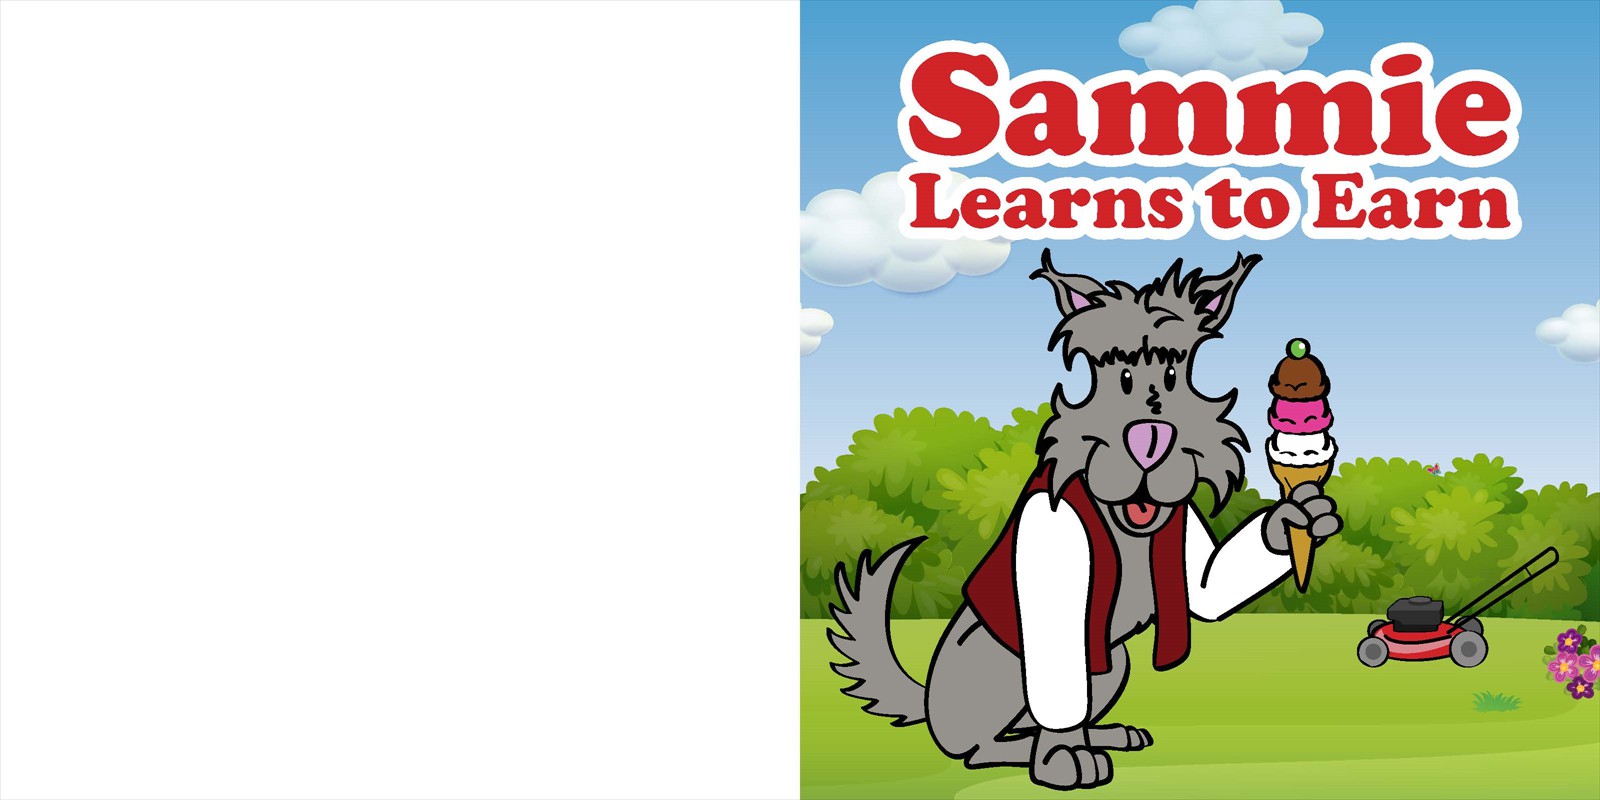 Slide 01 of the Sammie Learns to Earn Book